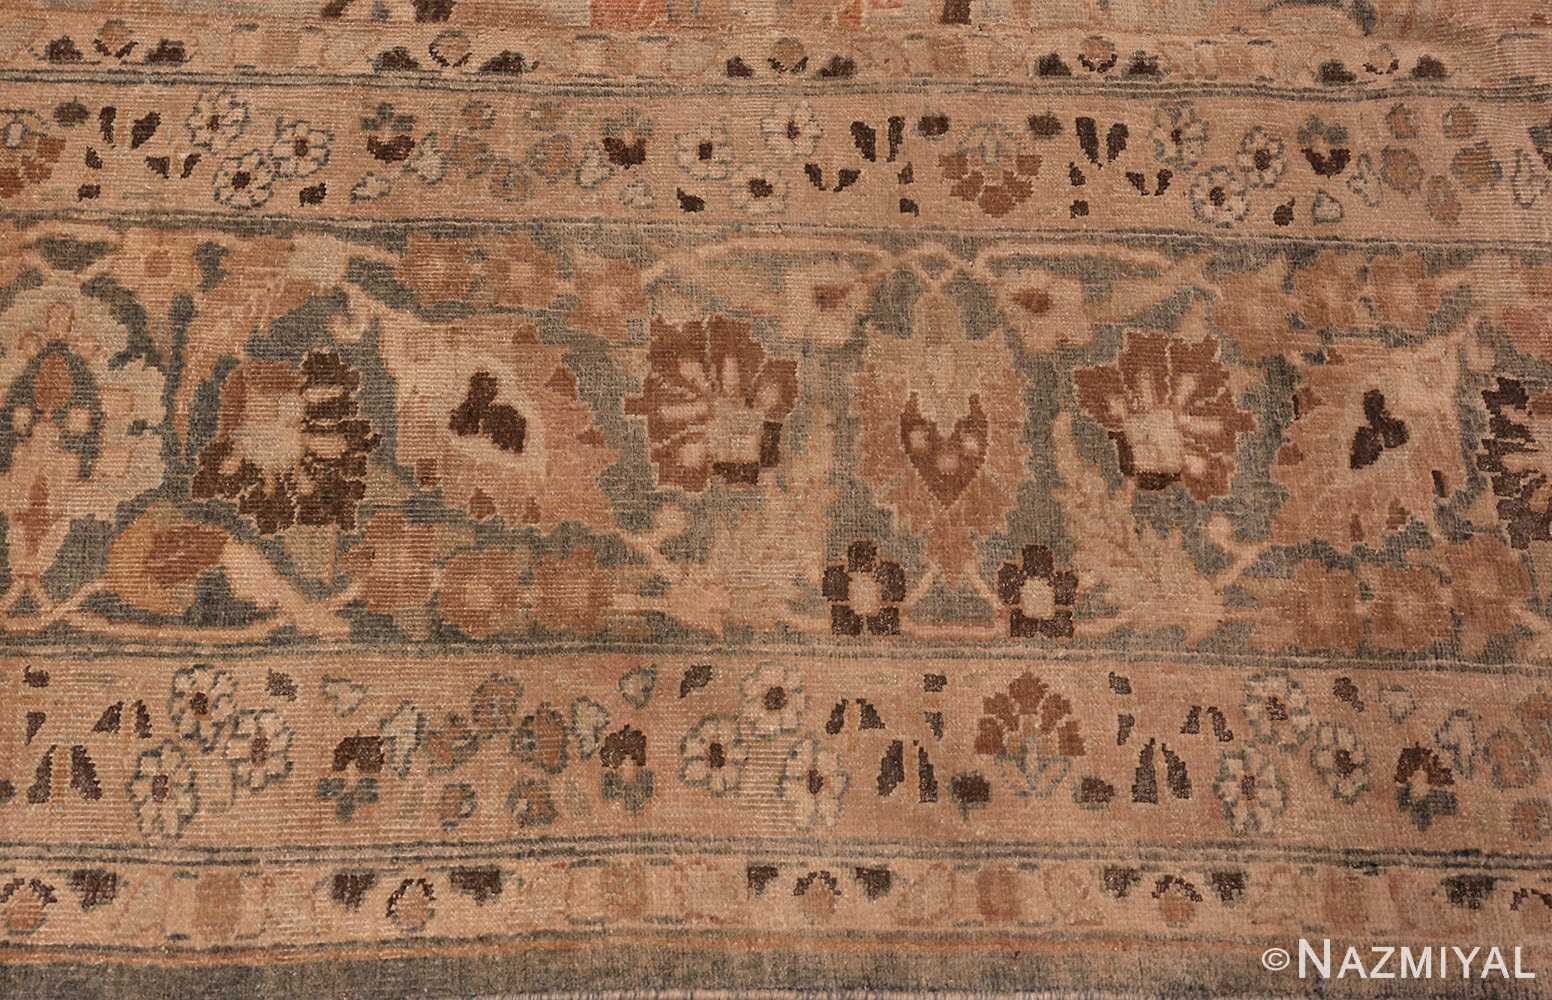 Picture of the Border of Antique Persian Khorassan Rug #49631 from Nazmiyal Antique Rugs in NYC